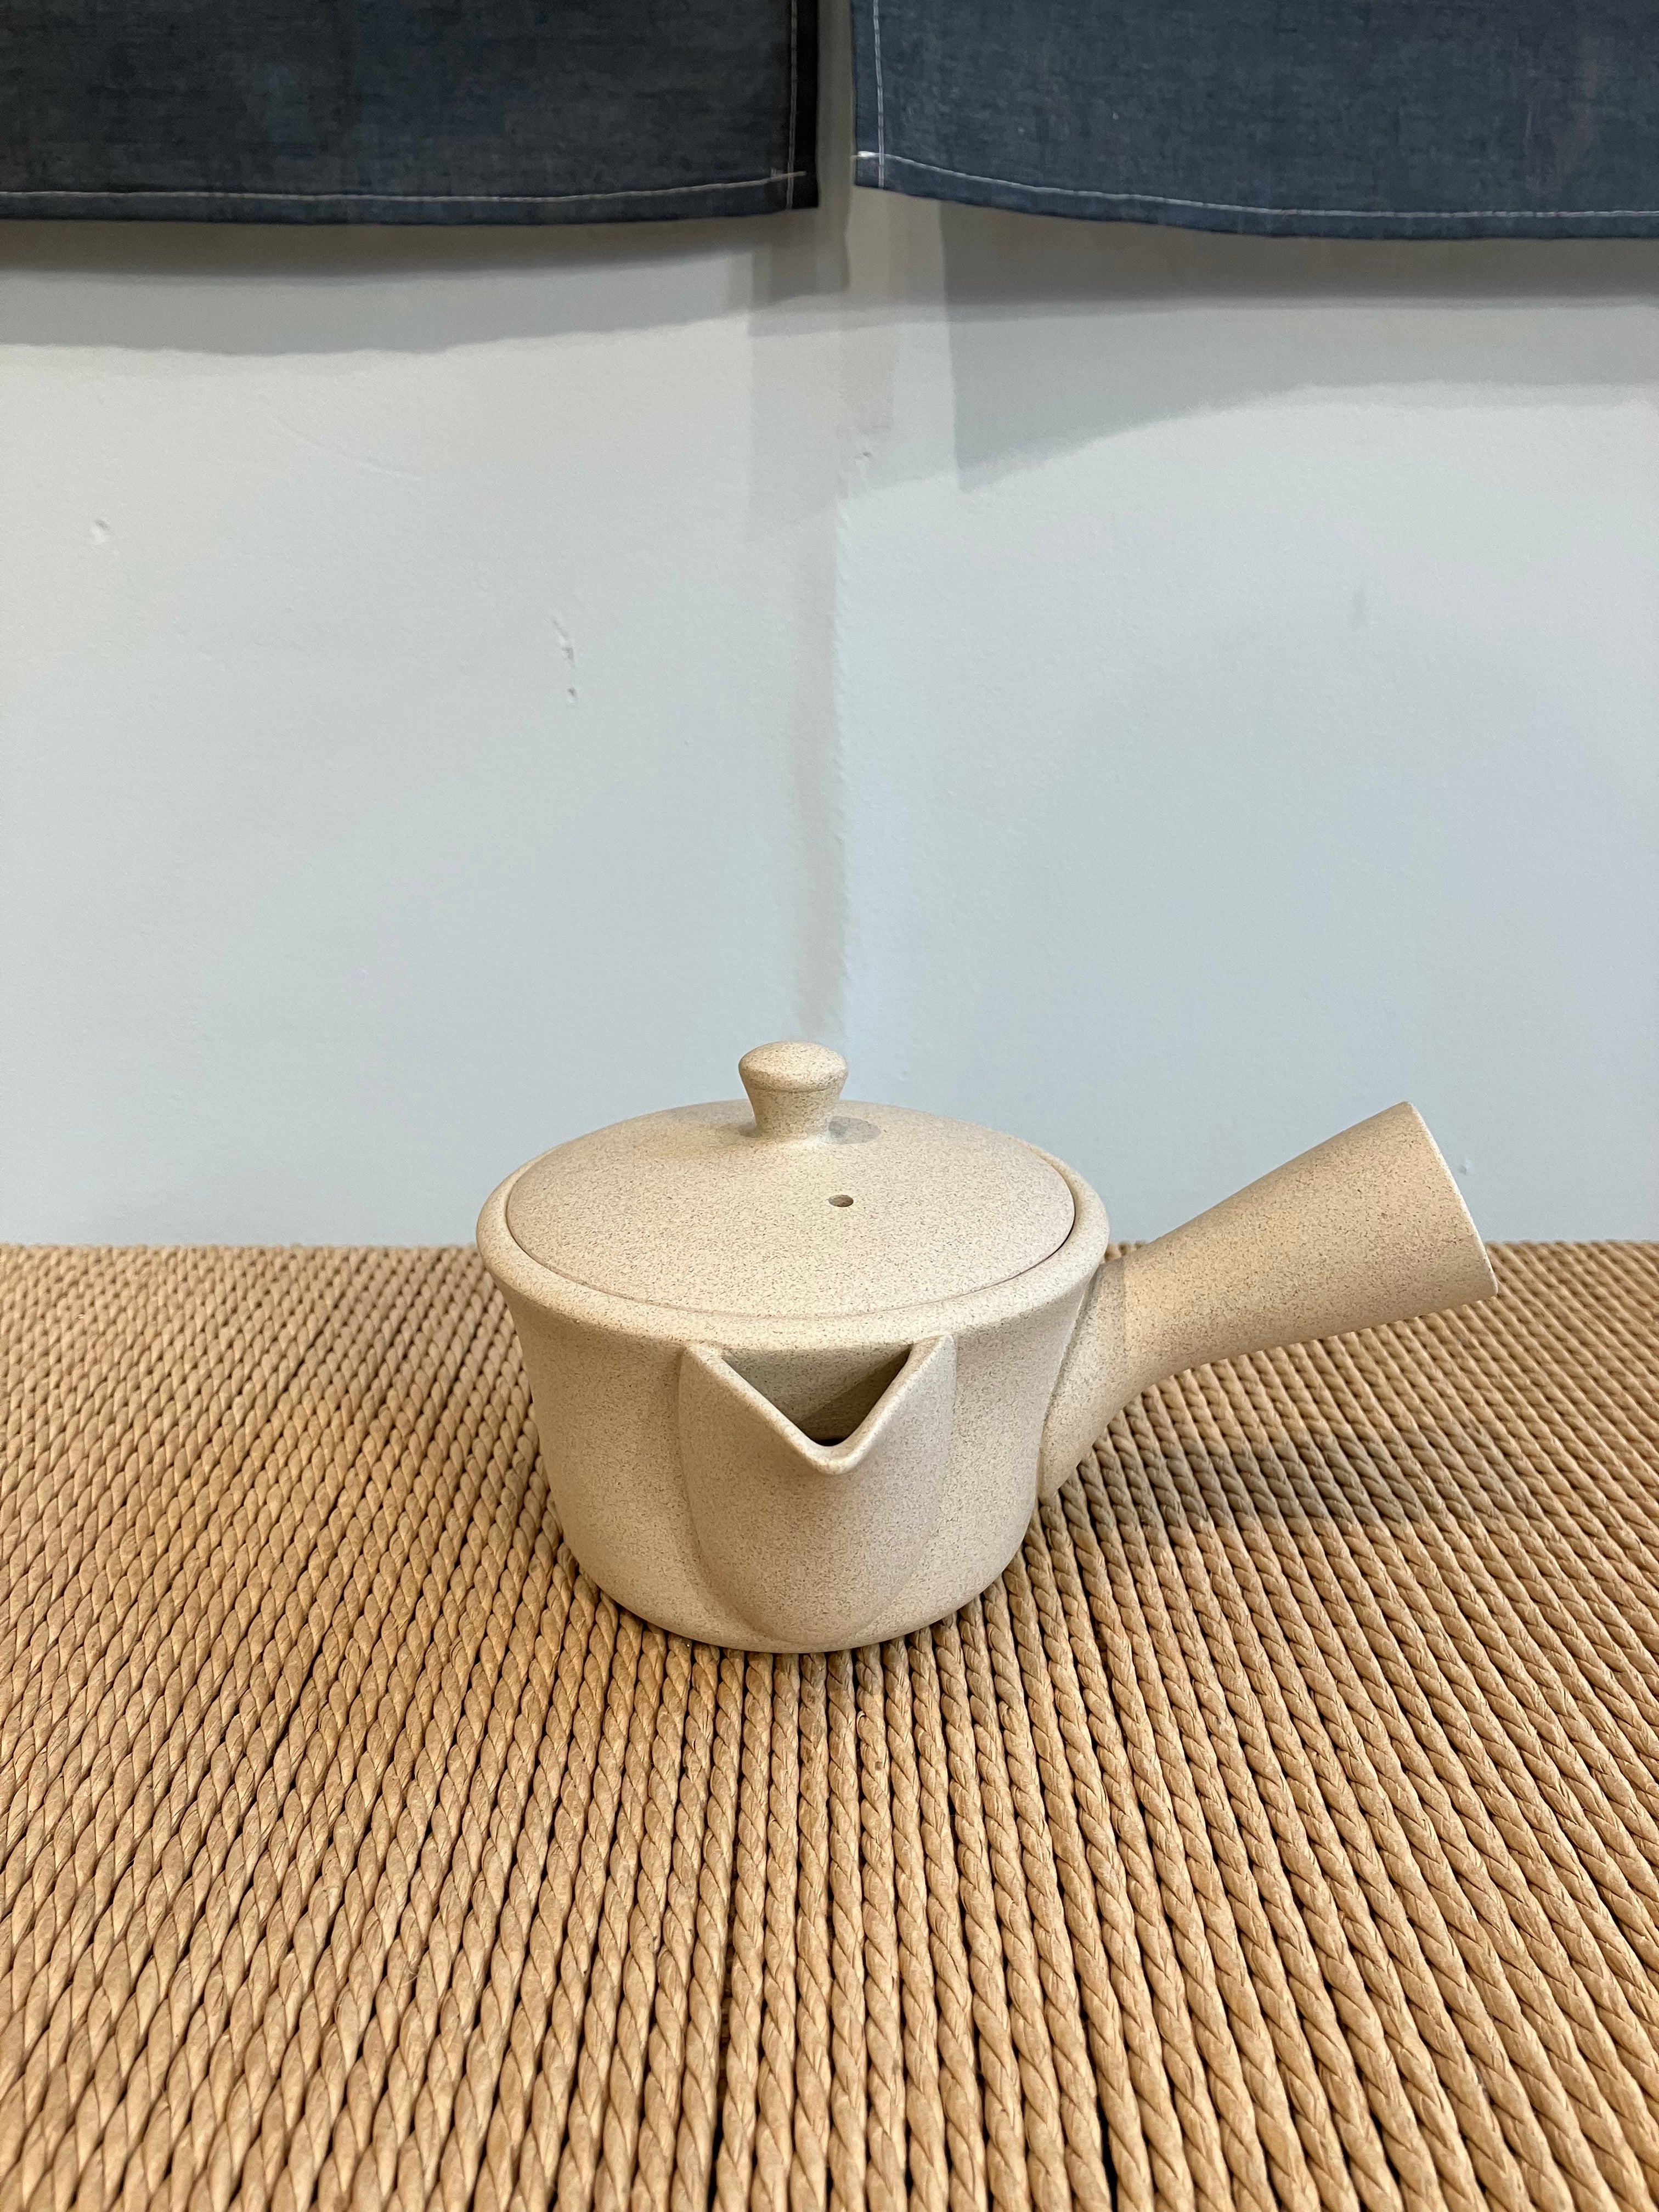 Small Japanese teapot in sand-coloured stoneware